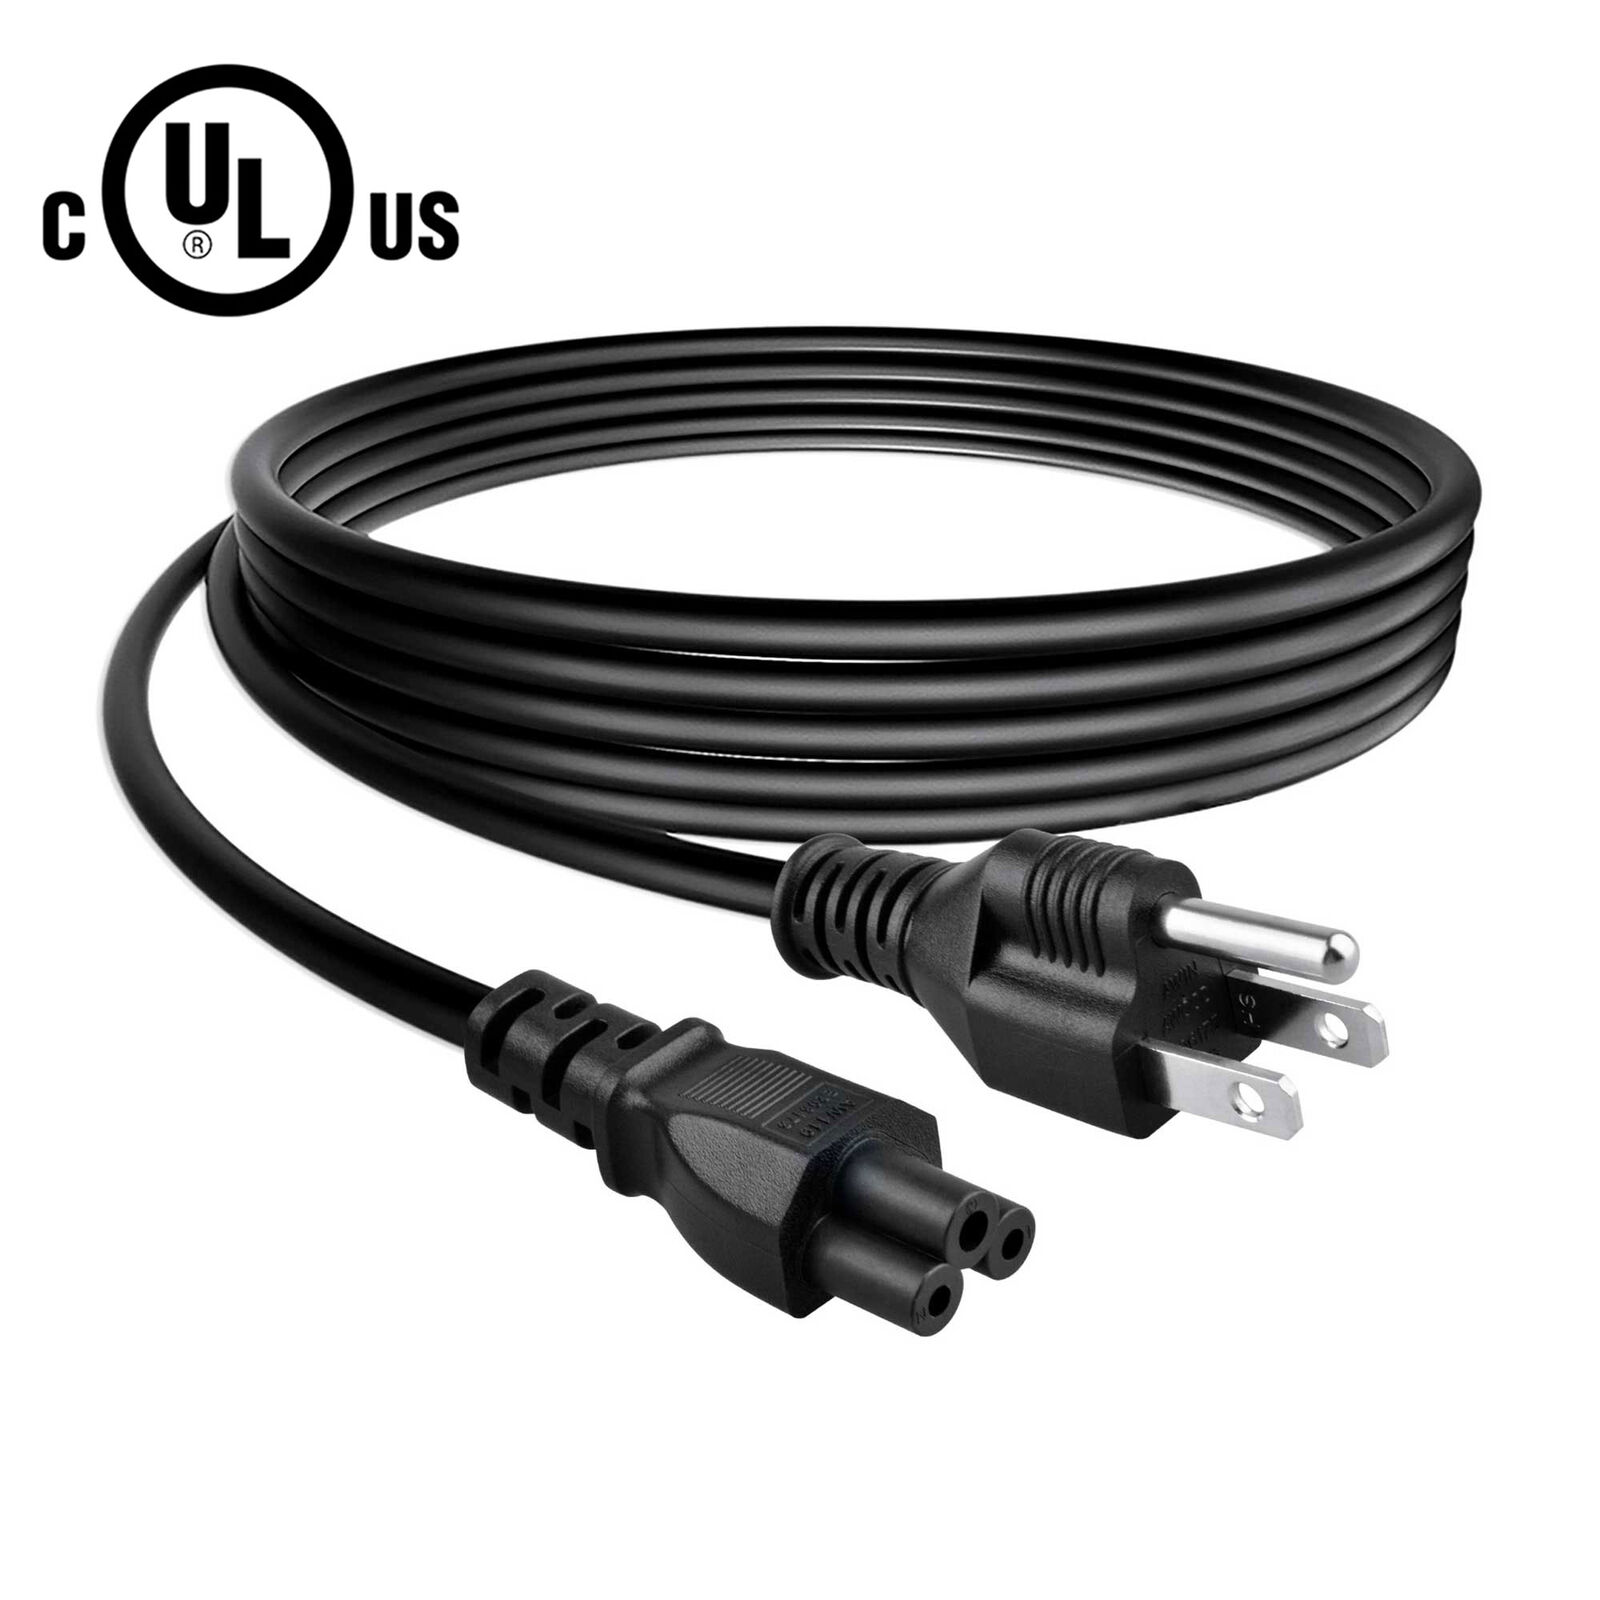 5ft UL AC Power Cord Cable For IEC-60320 IEC320 C5 to NEMA 5-15P US Plug 3-Prong